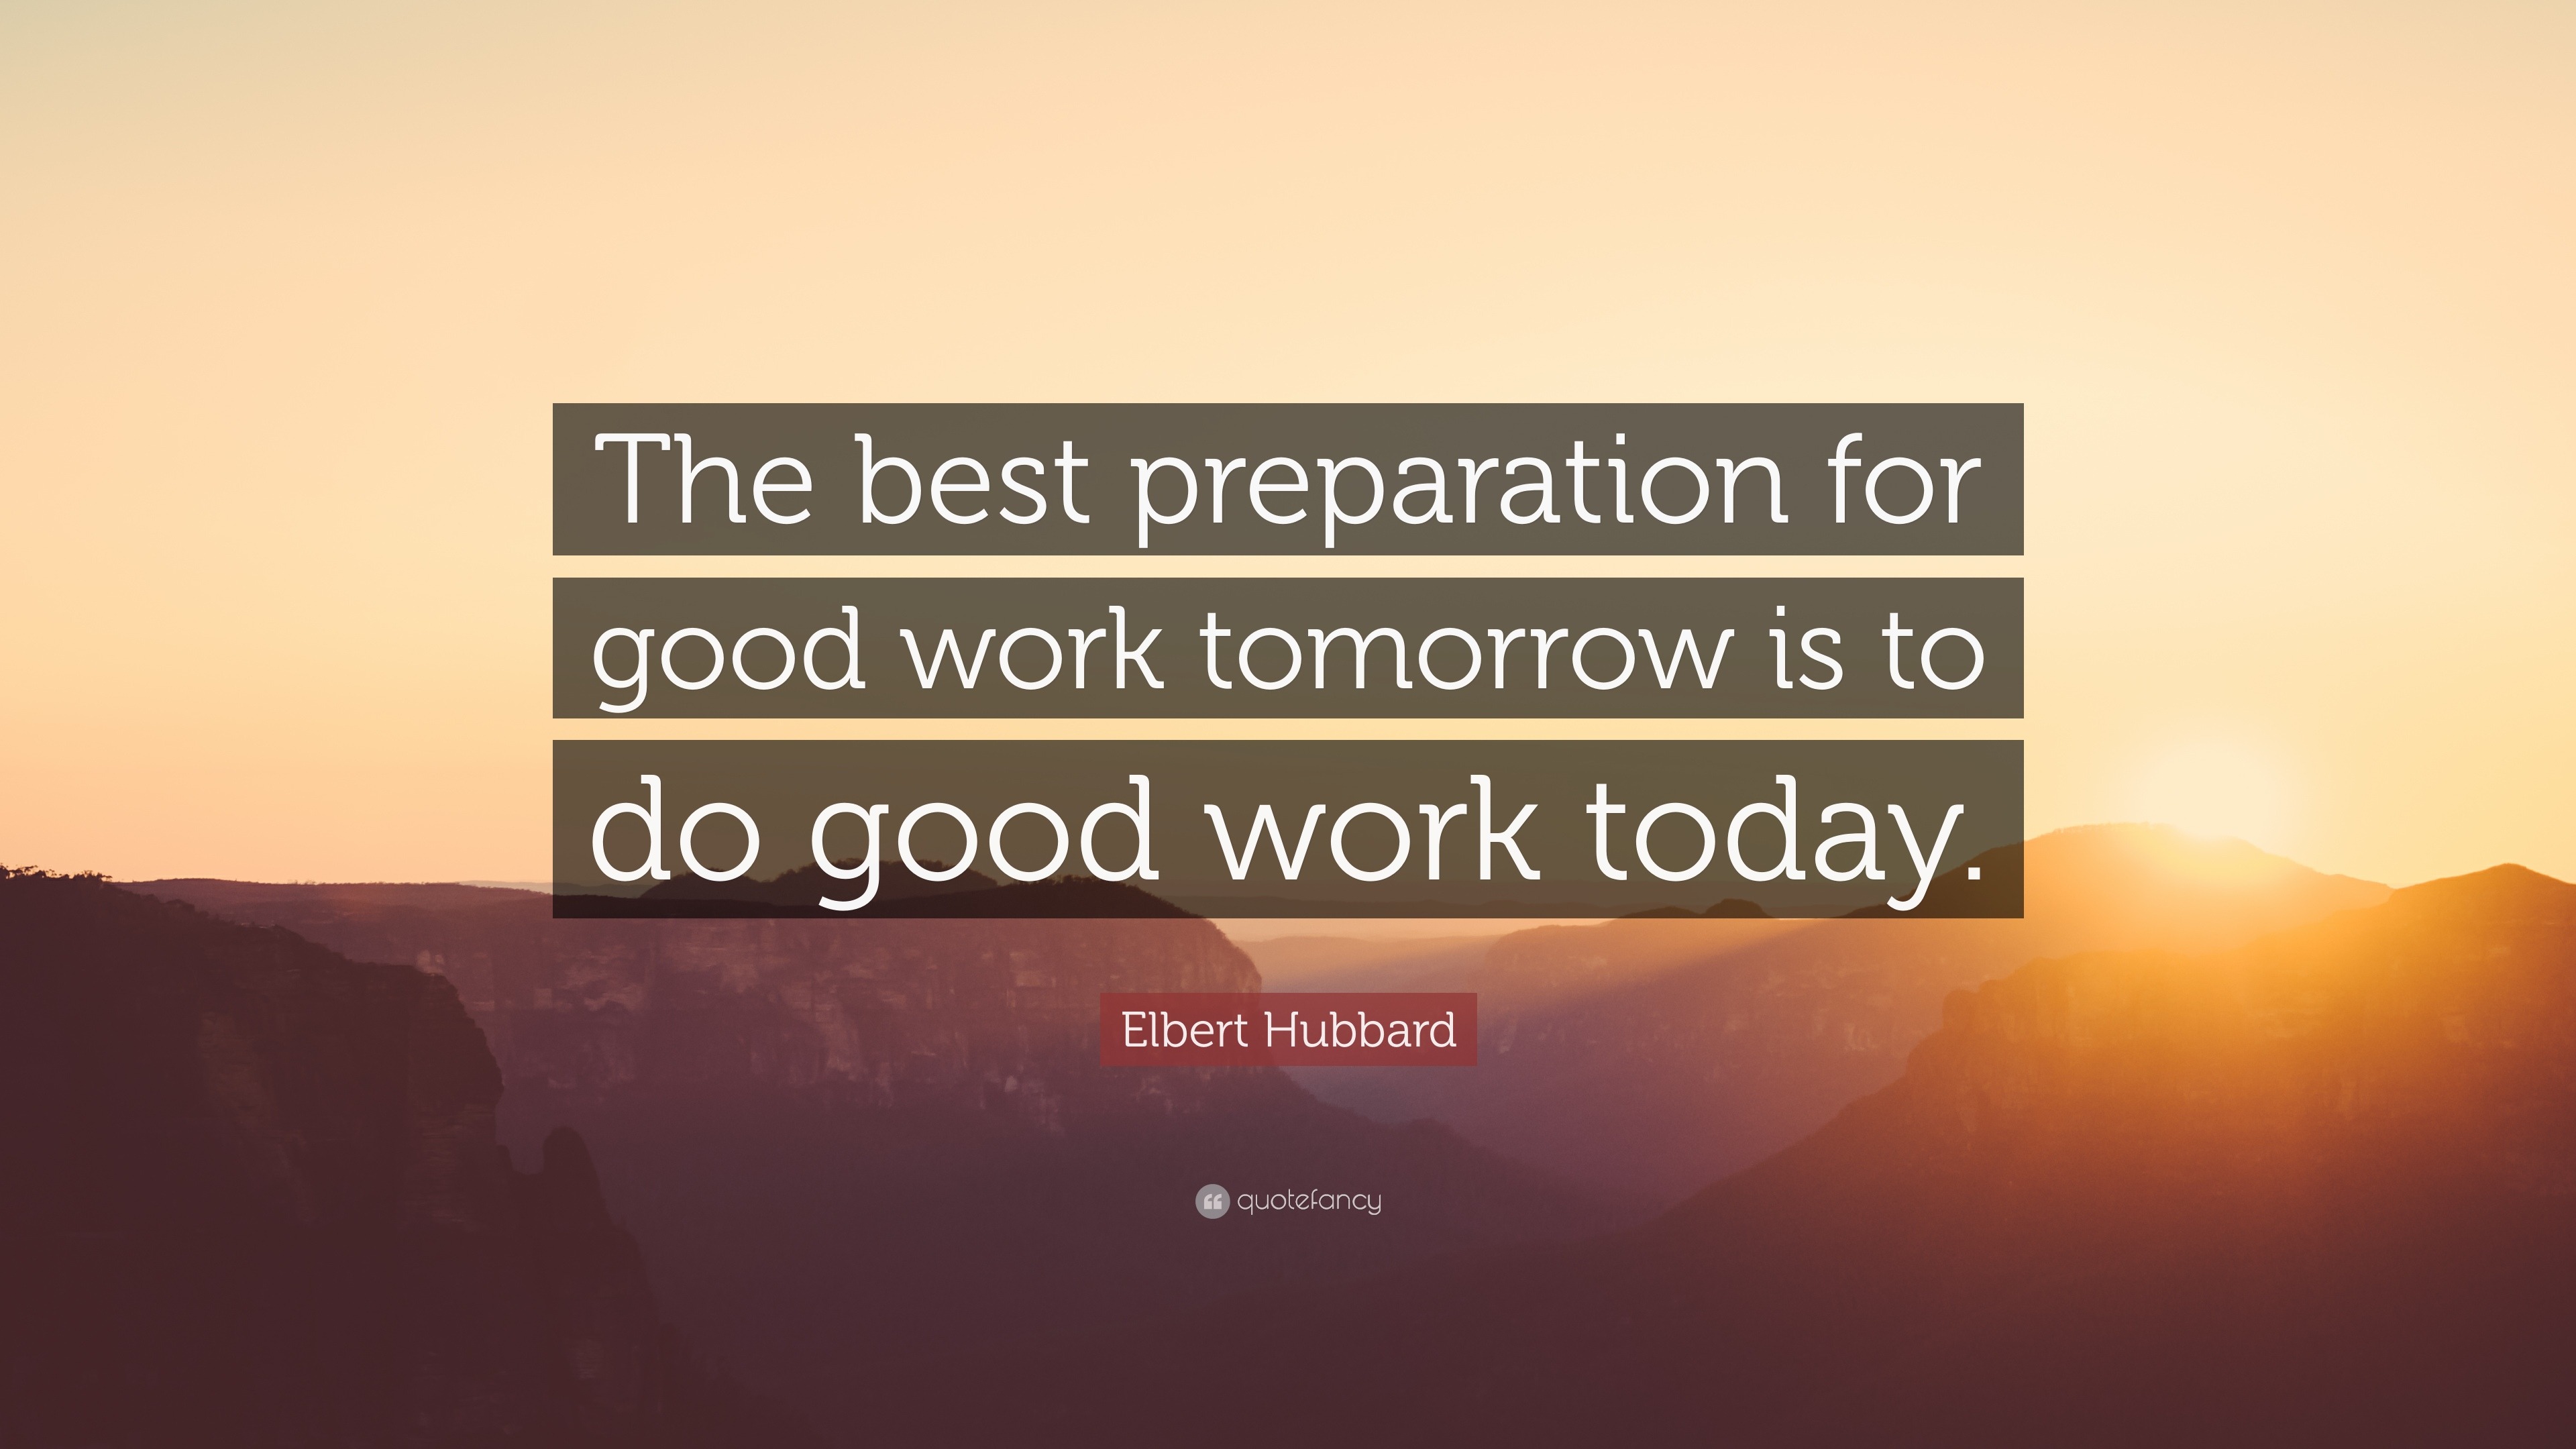 Elbert Hubbard Quote: “The best preparation for good work tomorrow is